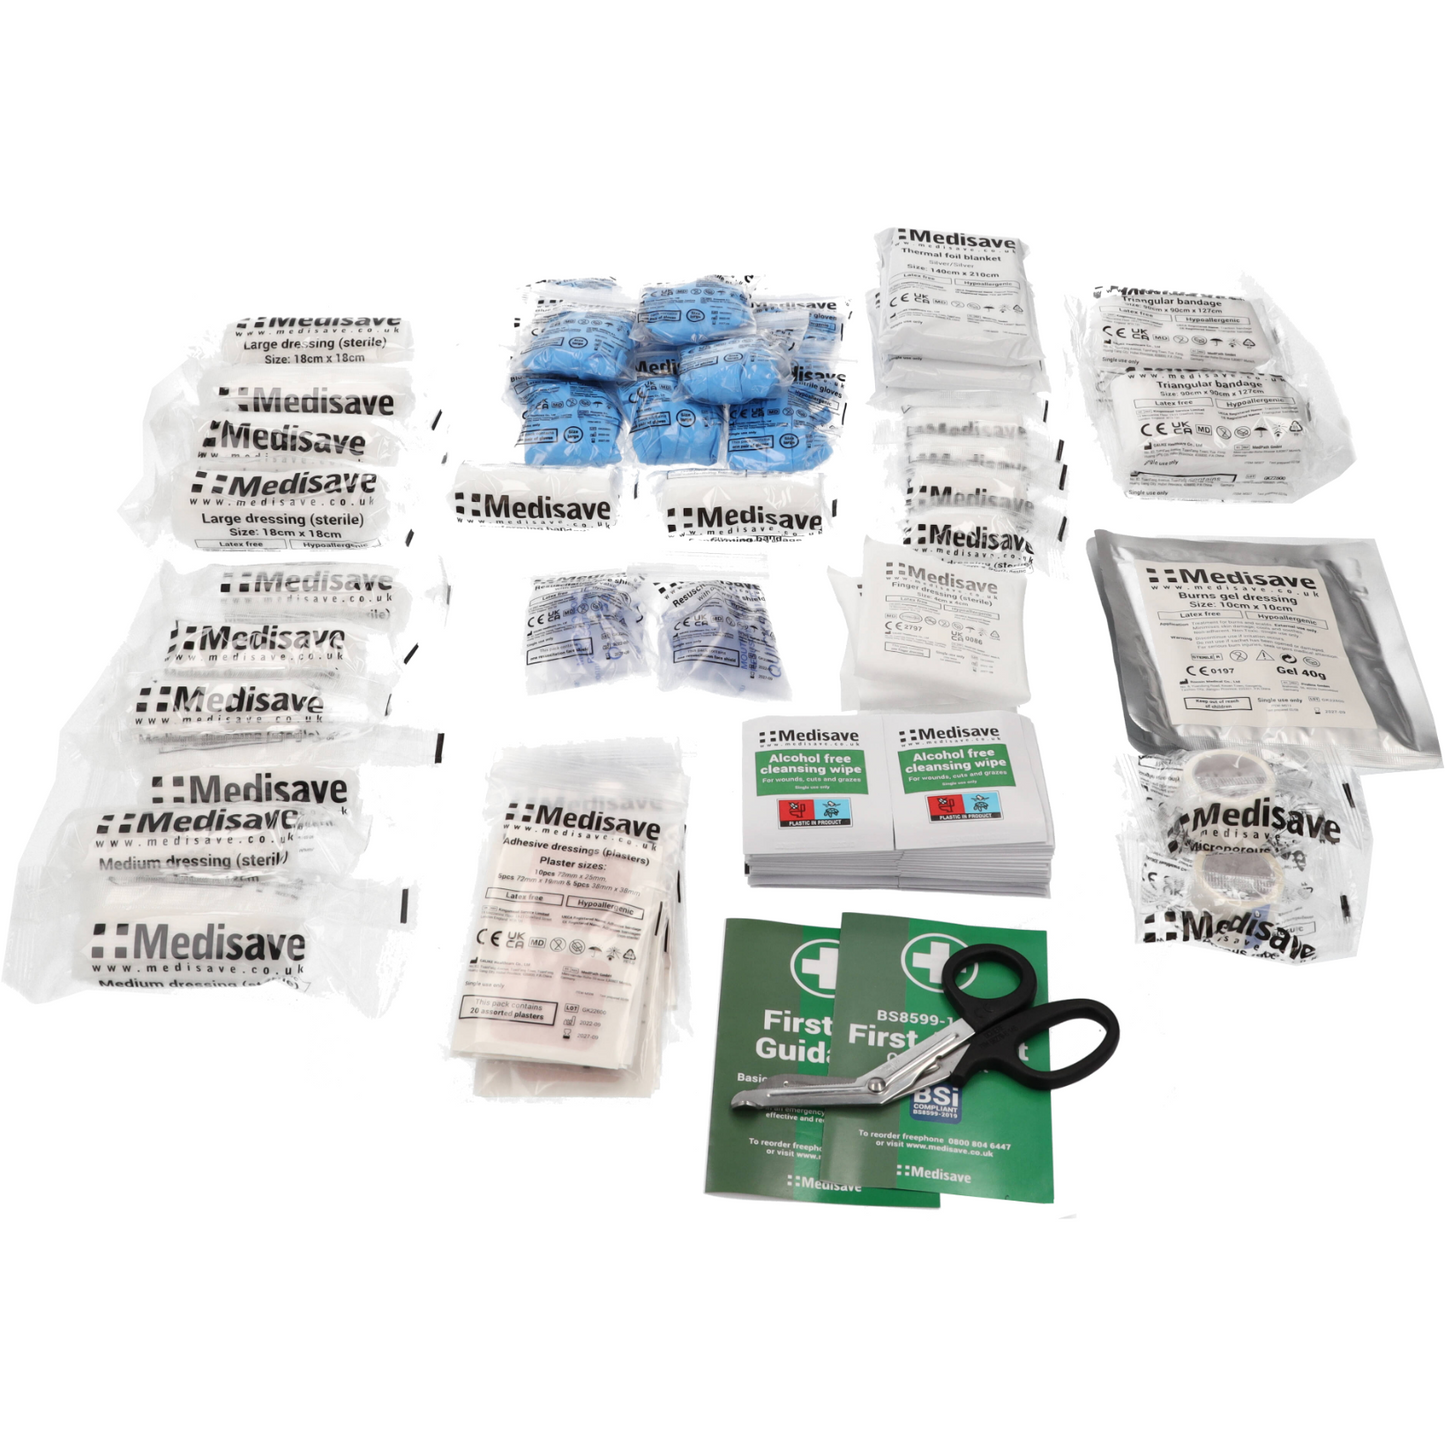 BS8599-1:2019 Workplace First Aid Kit - Small Kit Refill